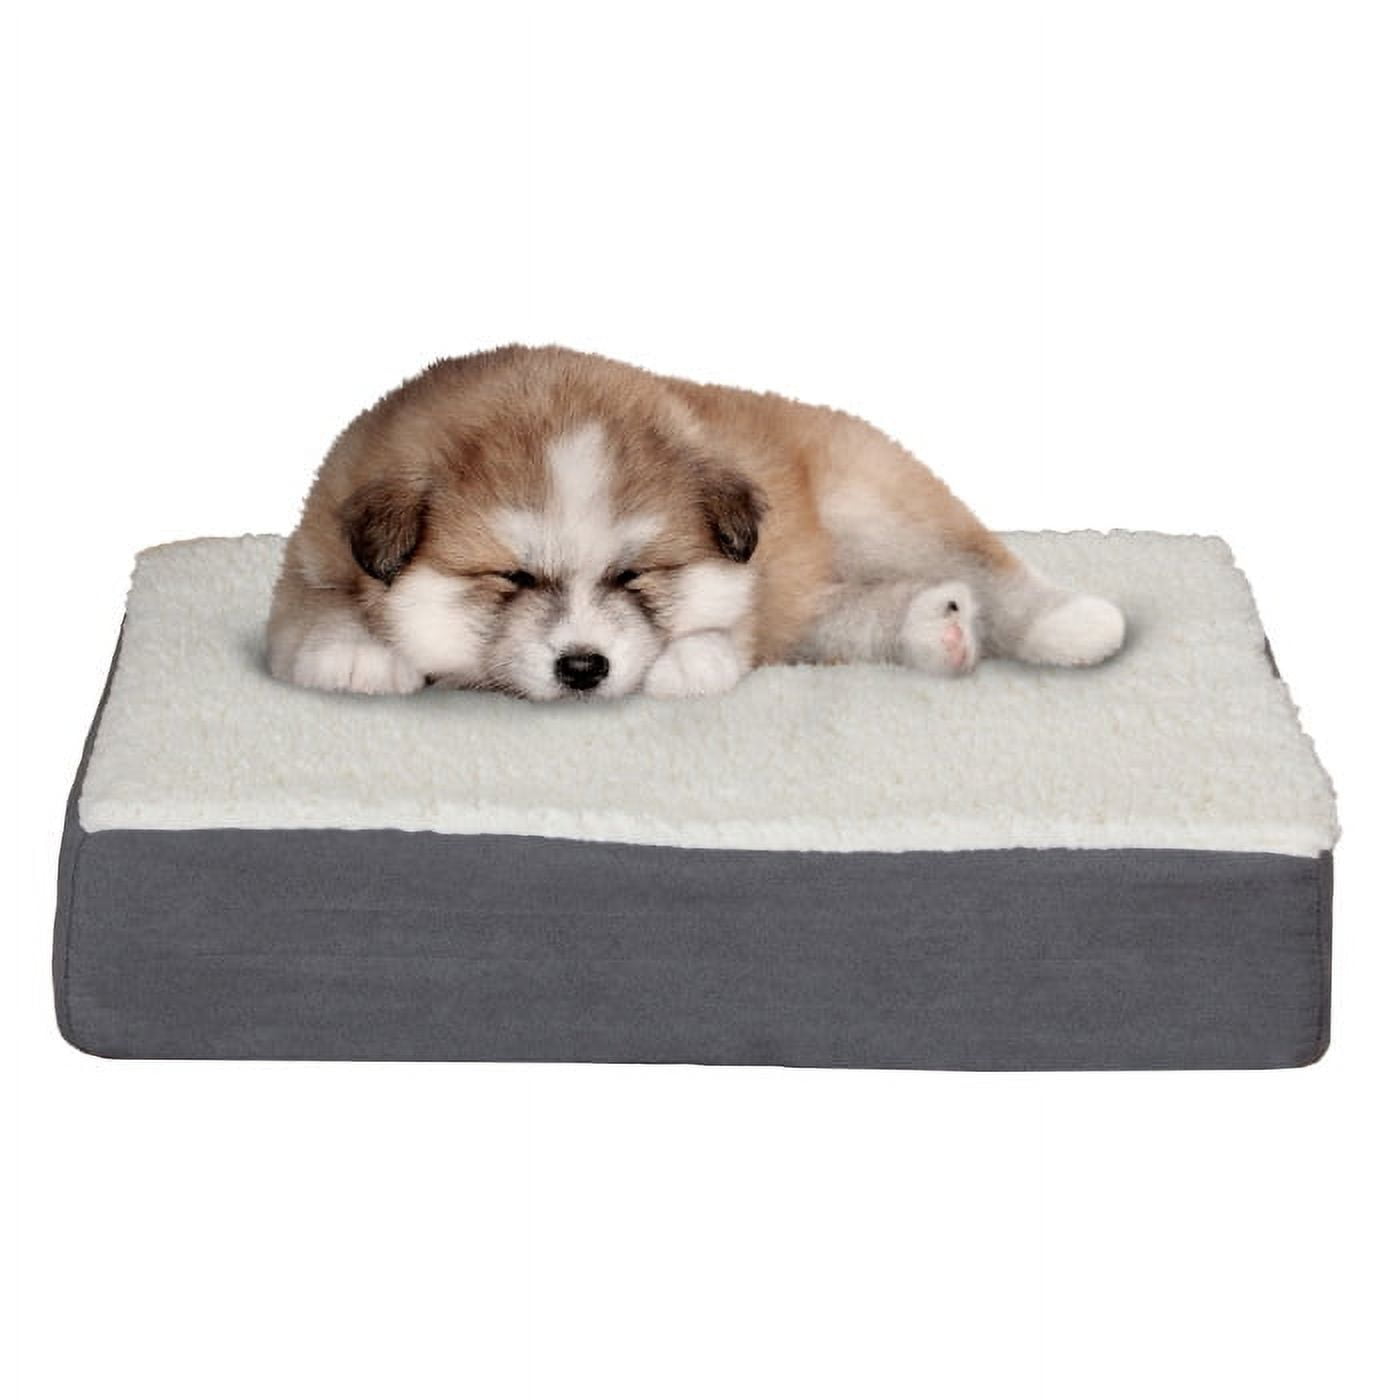 Orthopedic Dog Bed - 2-Layer Memory Foam Crate Mat with Machine